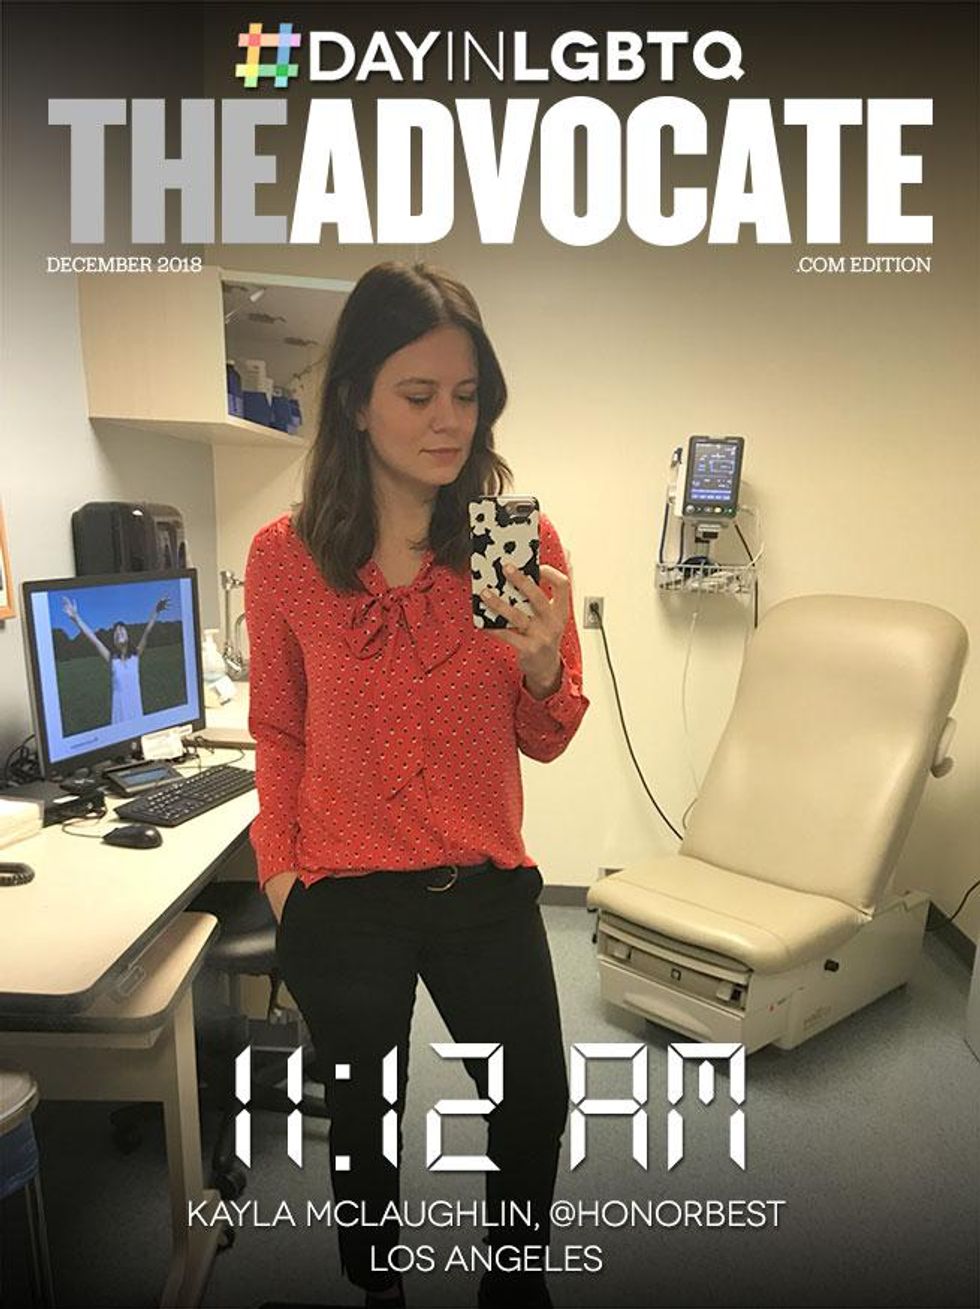 11-12-kayla-theadvocate-2018-dayinlgbt-cover-template-655